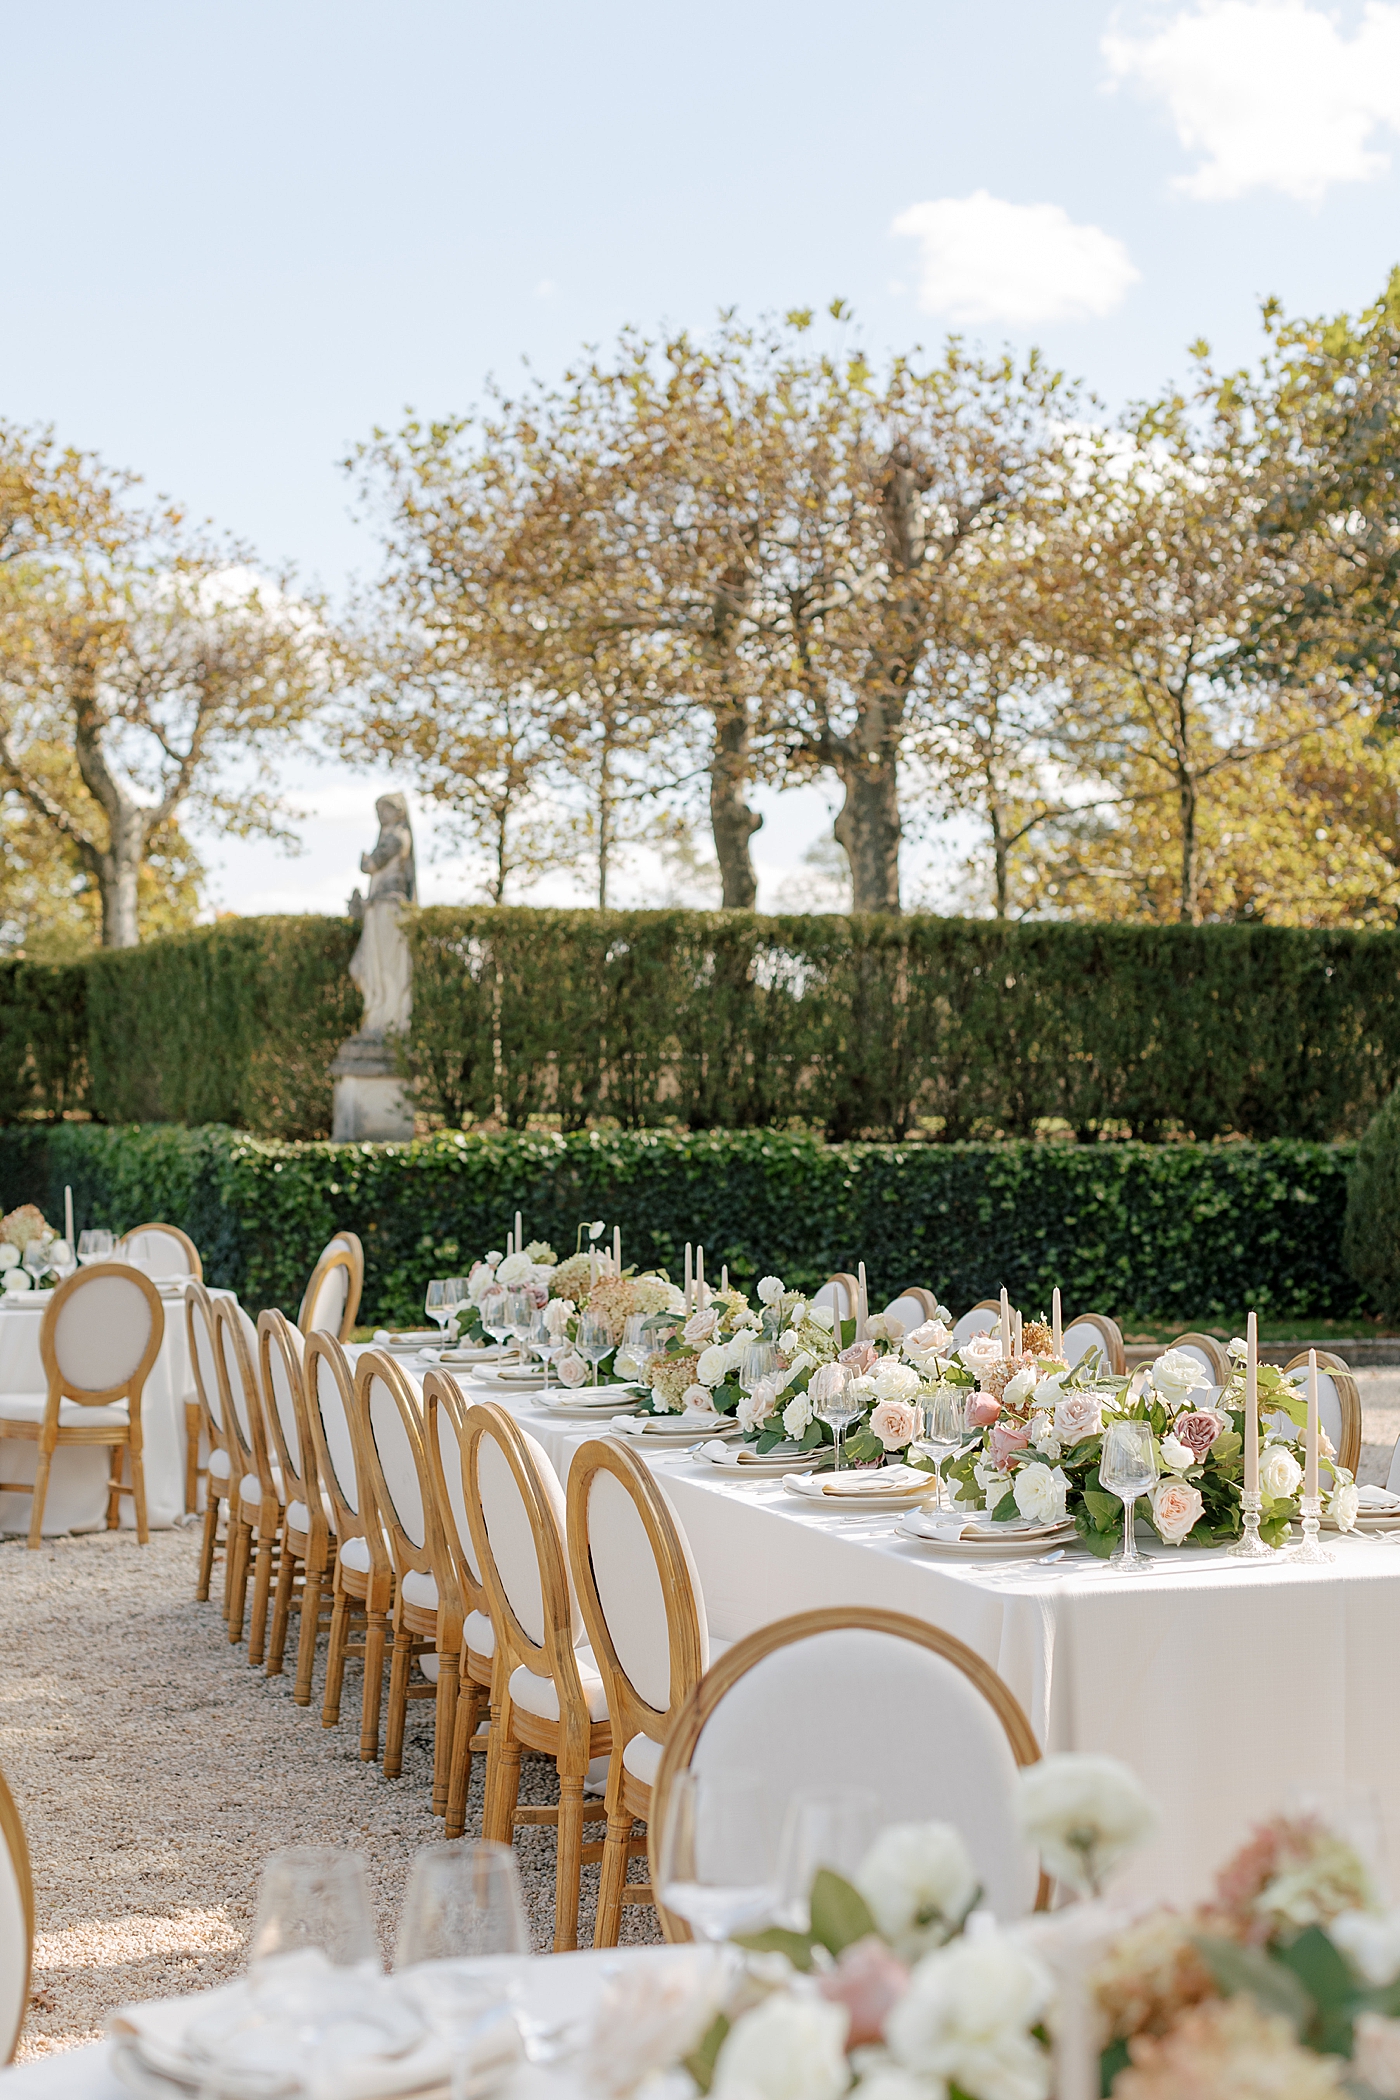 Details of a table setting with white and dusty pink flowers and white table cloths in a European garden during Oheka castle wedding | Image by Hope Helmuth Photography